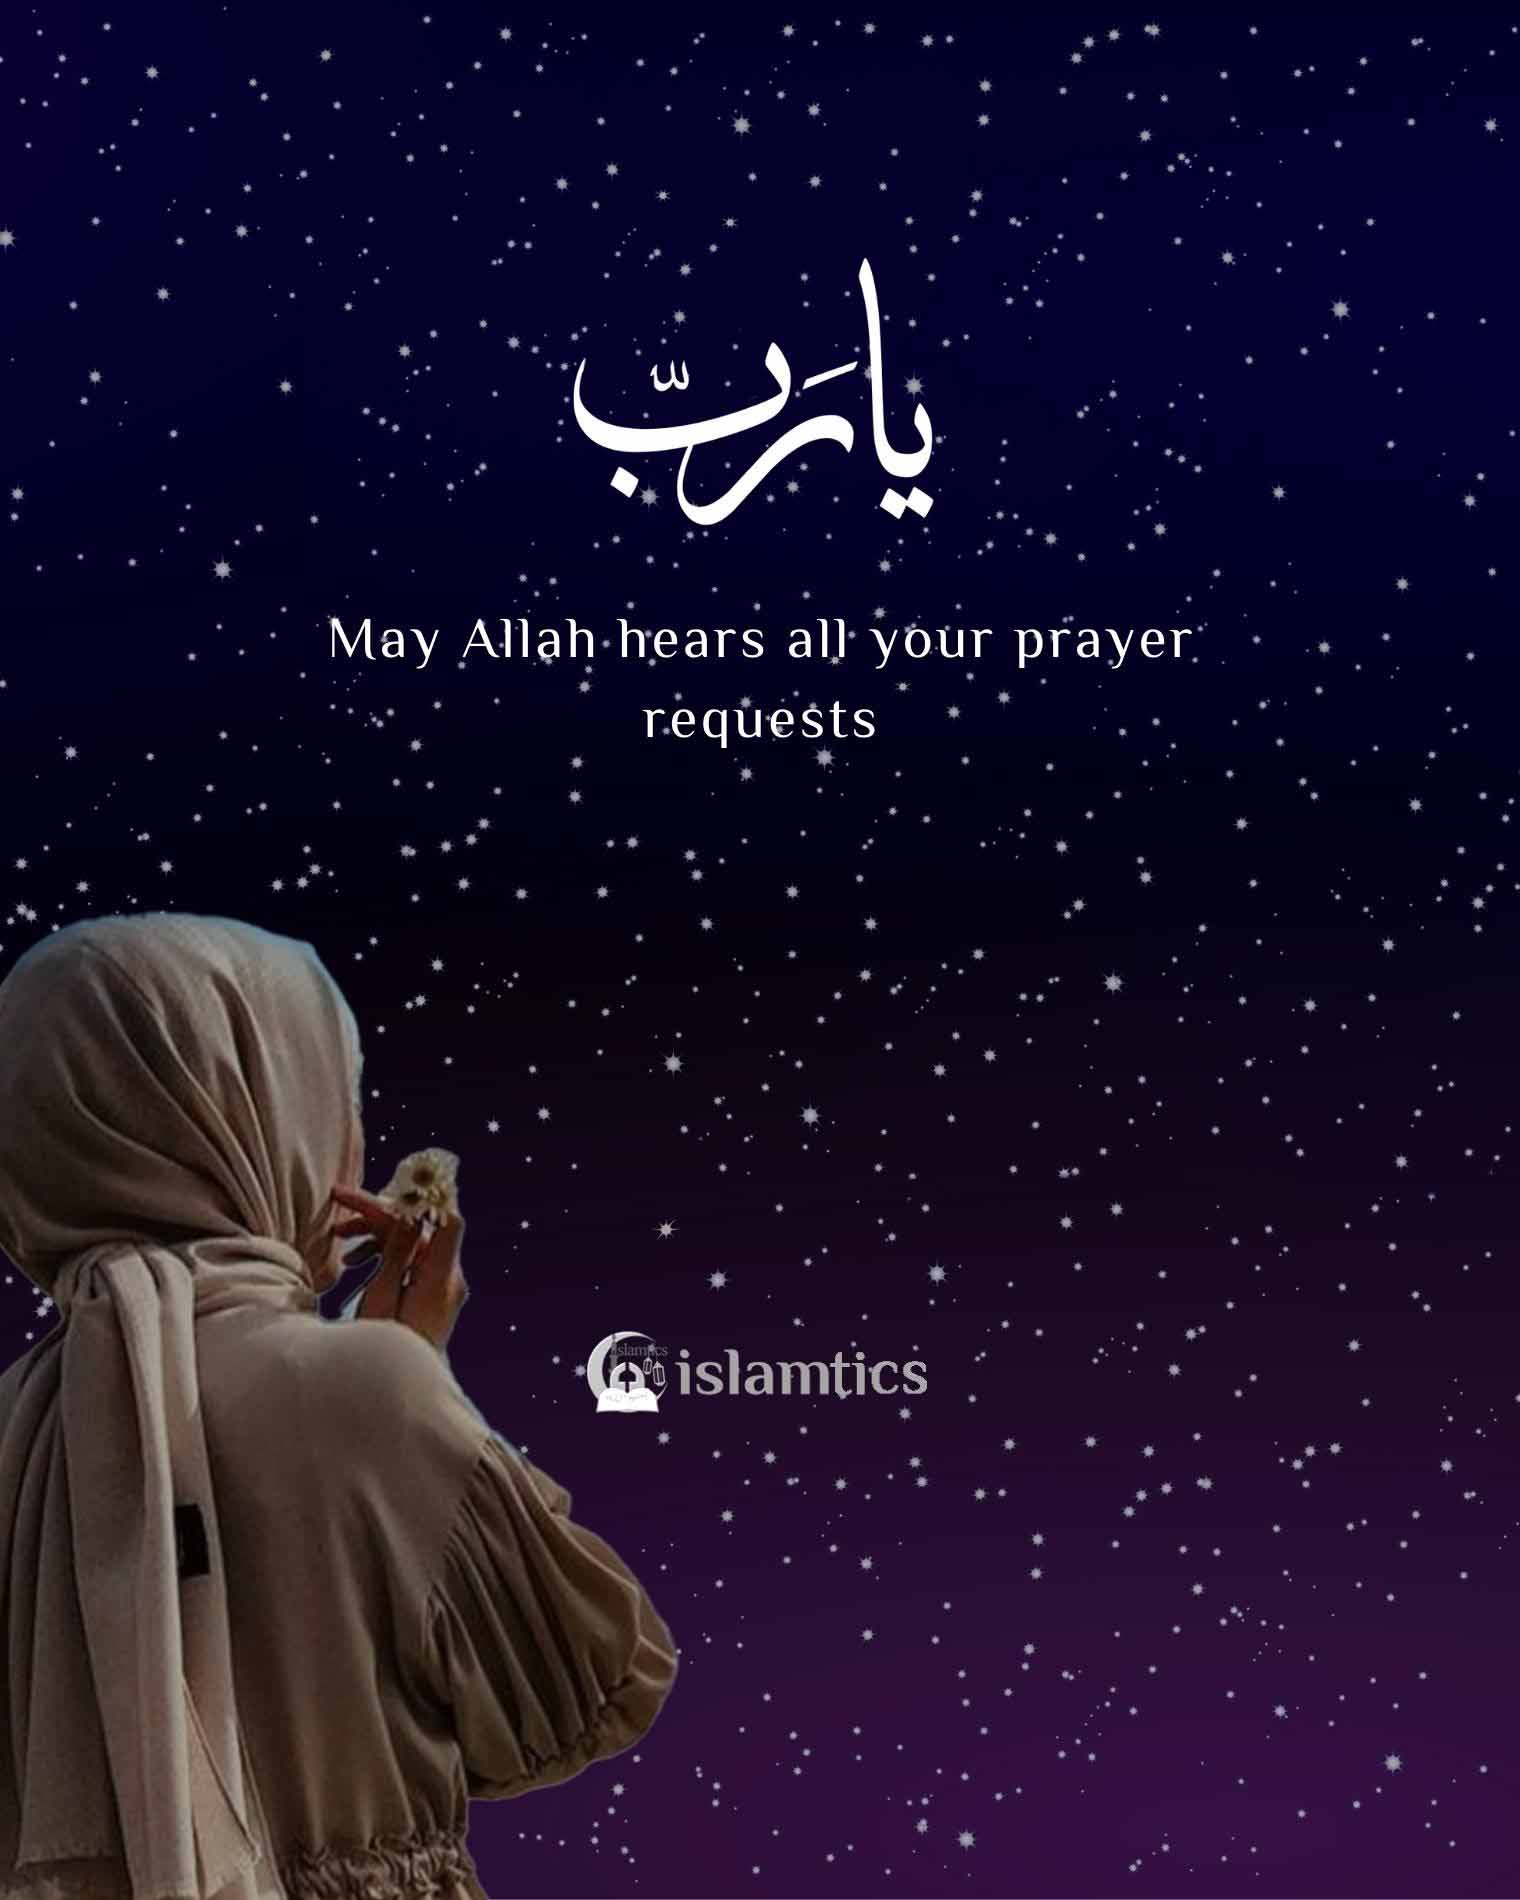  May Allah hear all your prayer requests